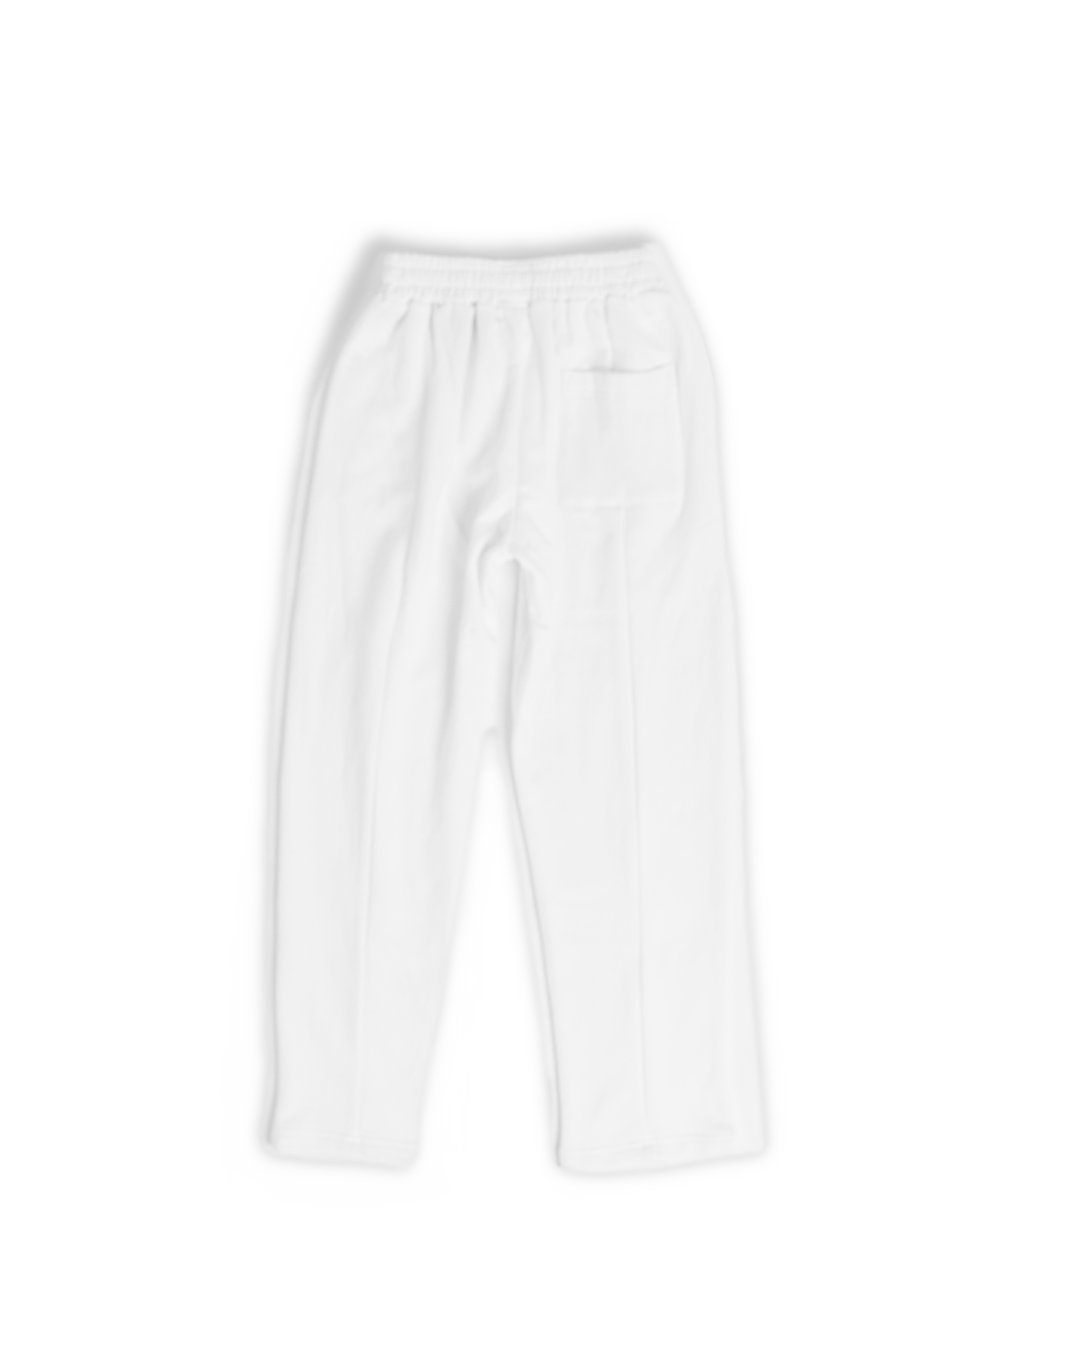 BASIC RELAXED SWEATS - OFF WHITE